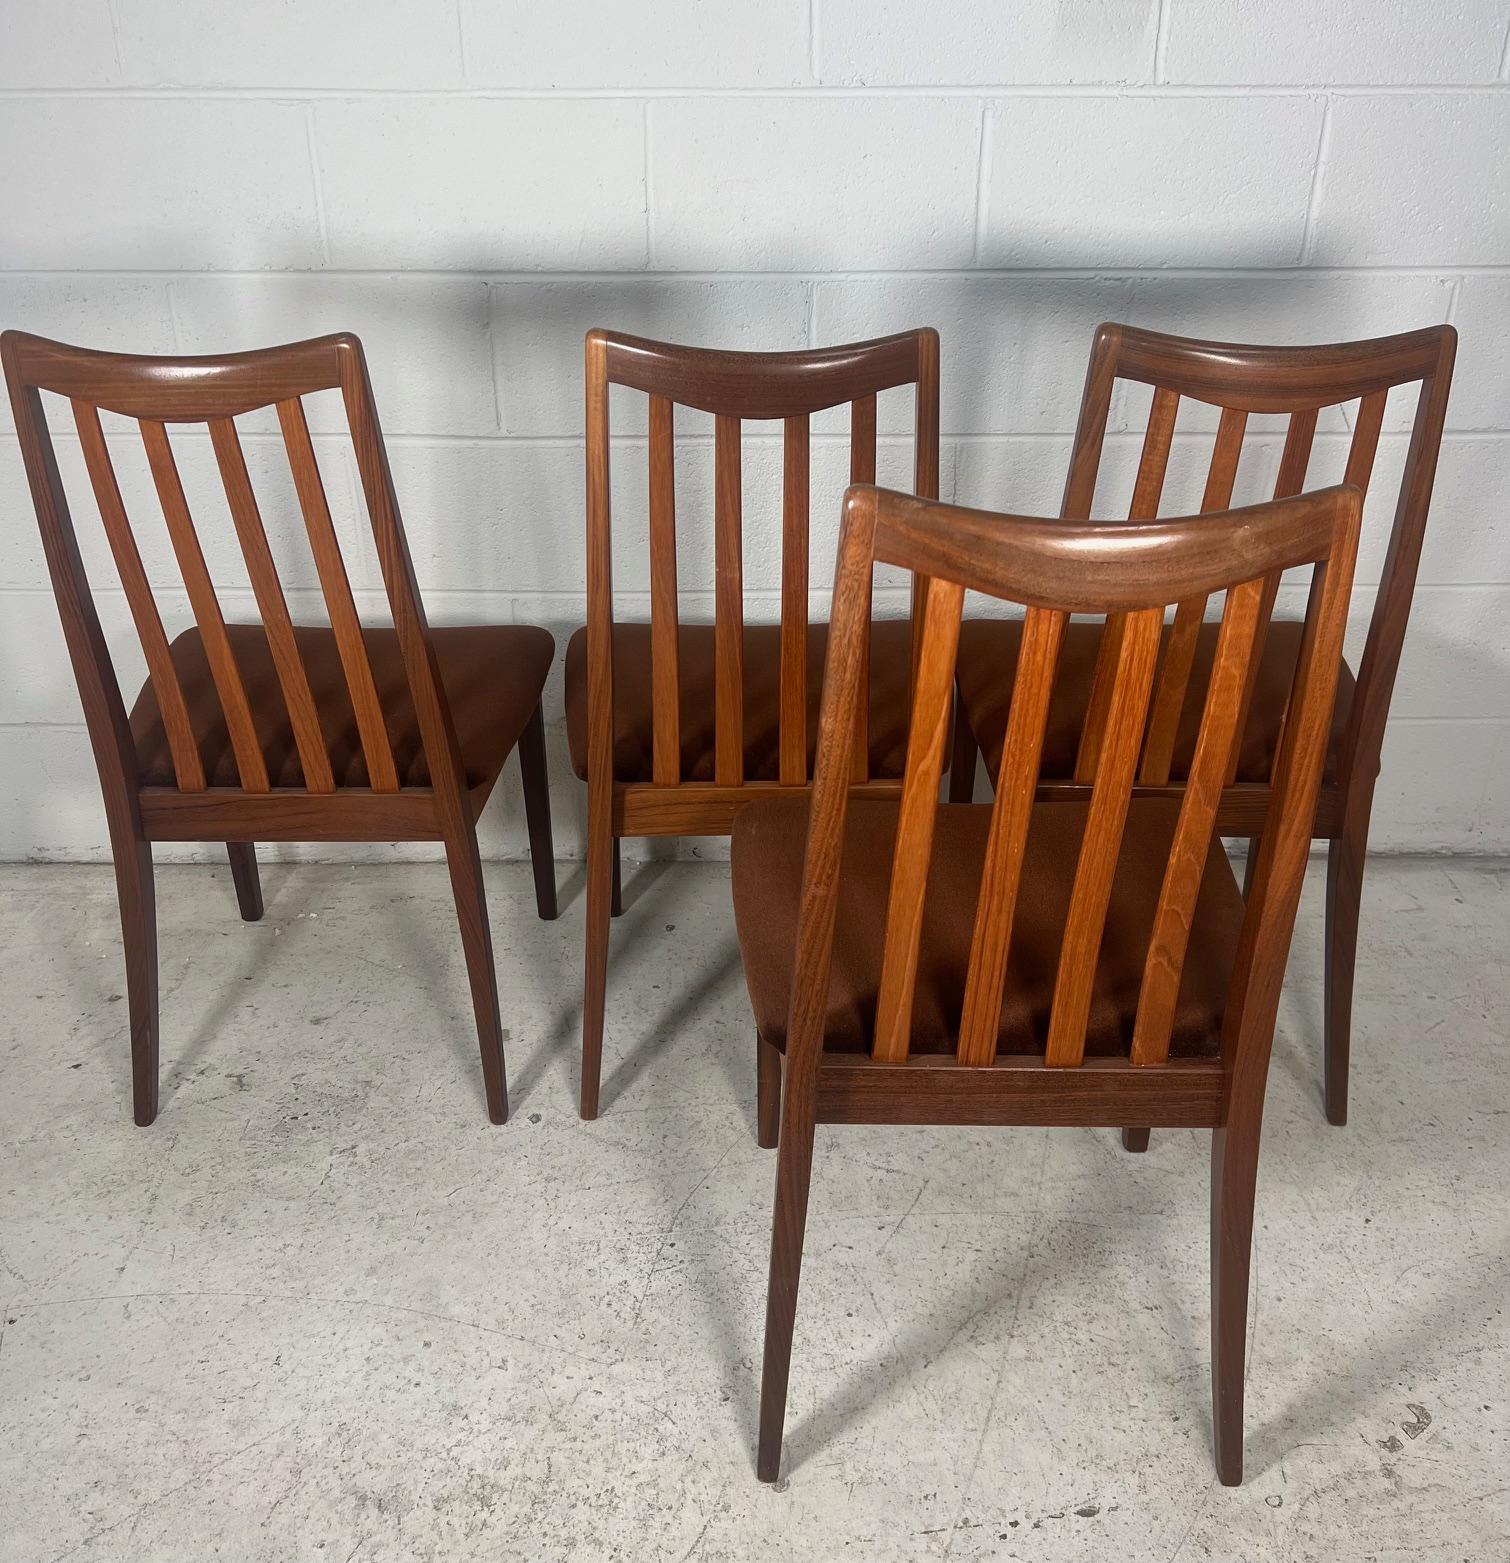 20th Century Set Of 4 Mid Century Modern Teak Dining Chairs By G Plan For Sale